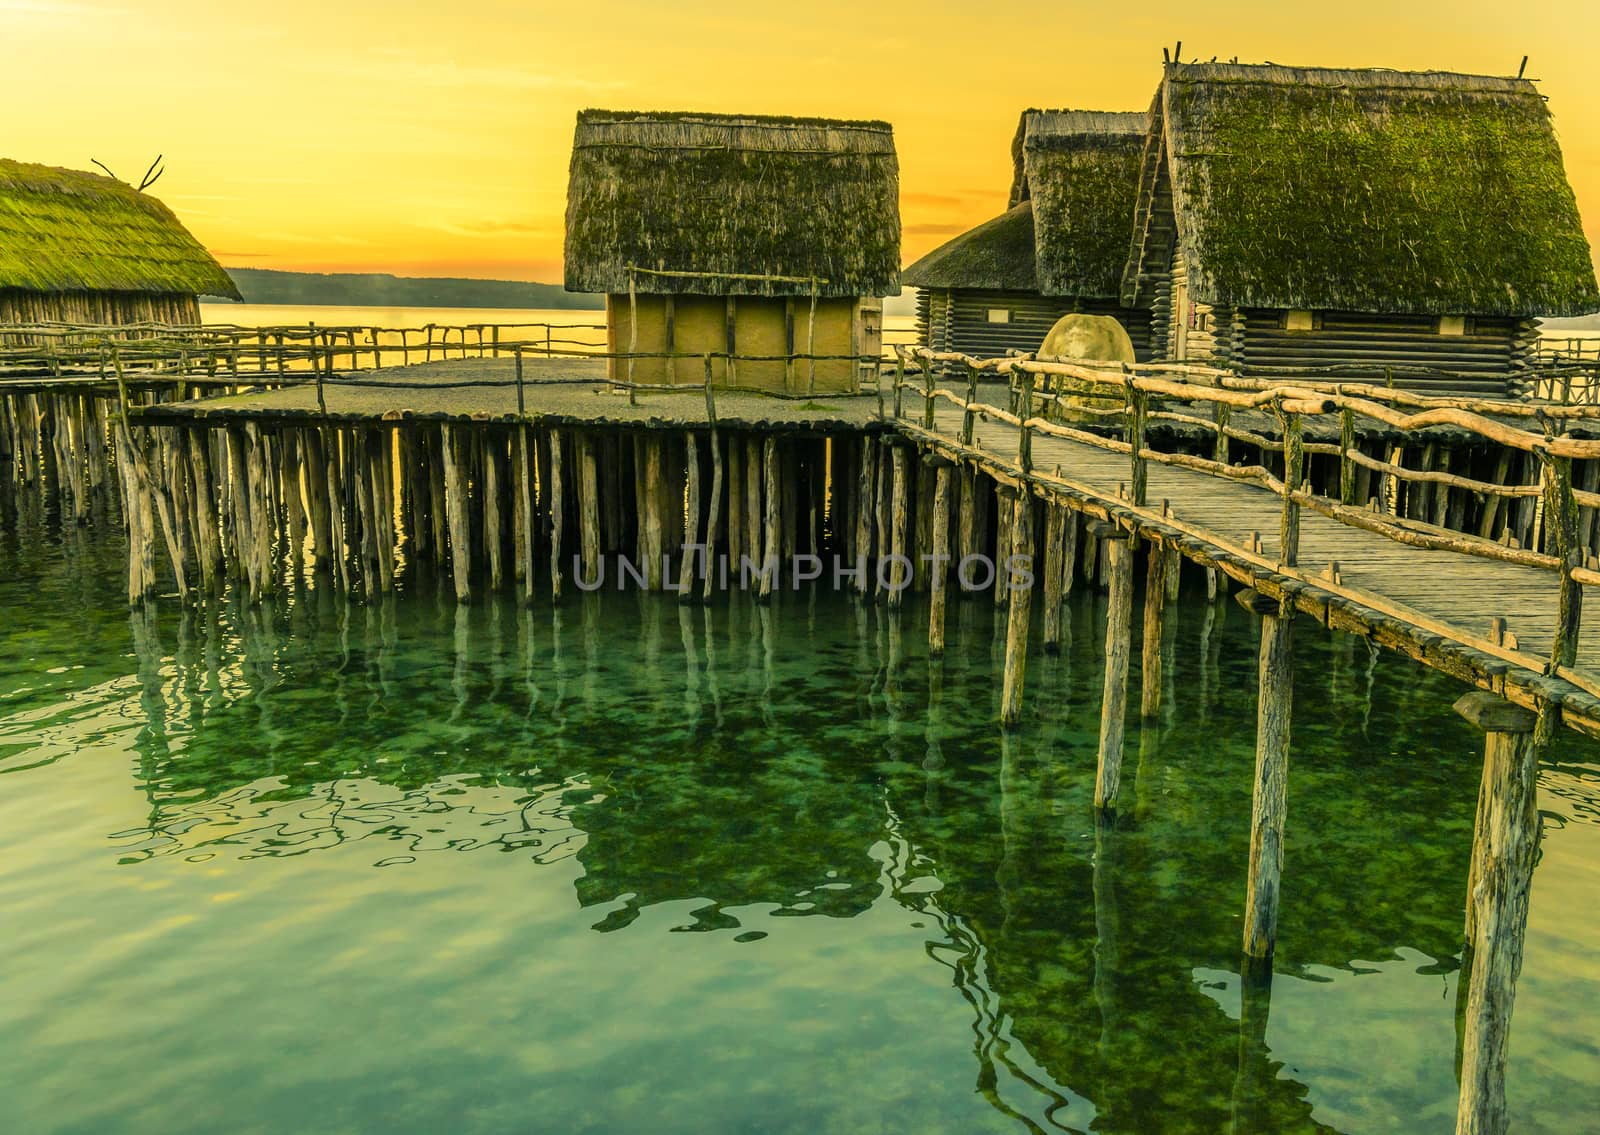 Fishing huts suspended on pillars by YesPhotographers